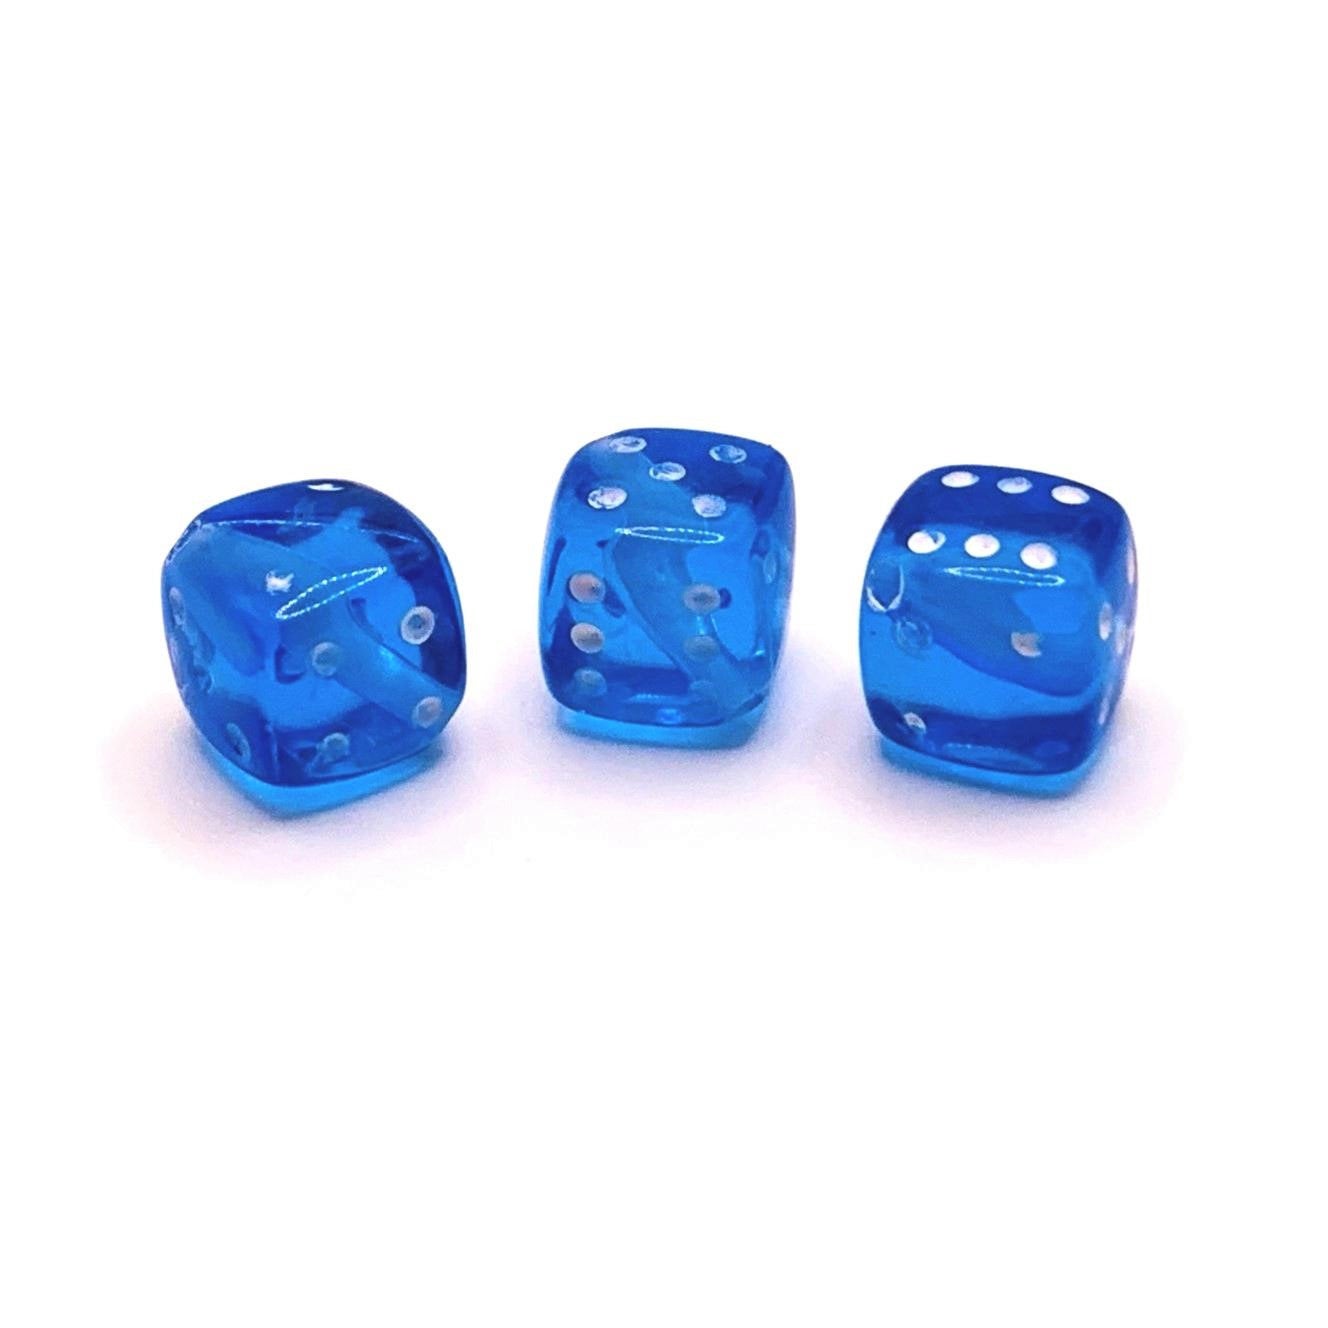 4, 20 or 50 Pieces: Blue Dice Spacer Beads